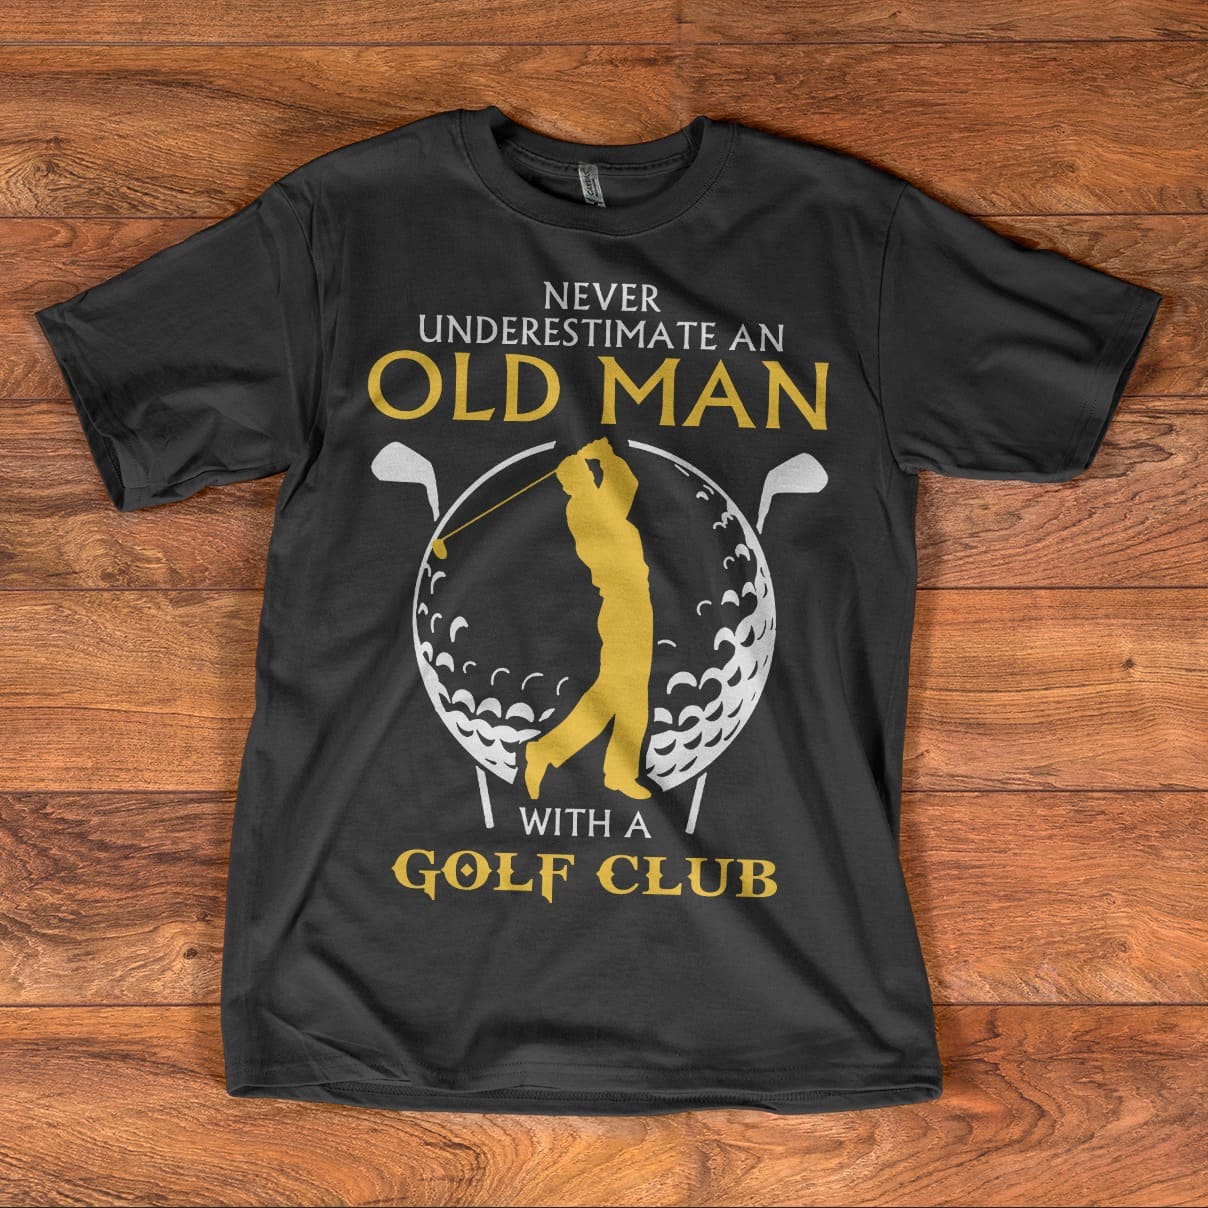 Never underestimate an old man with a golf club - Old man the golfer, love playing golf